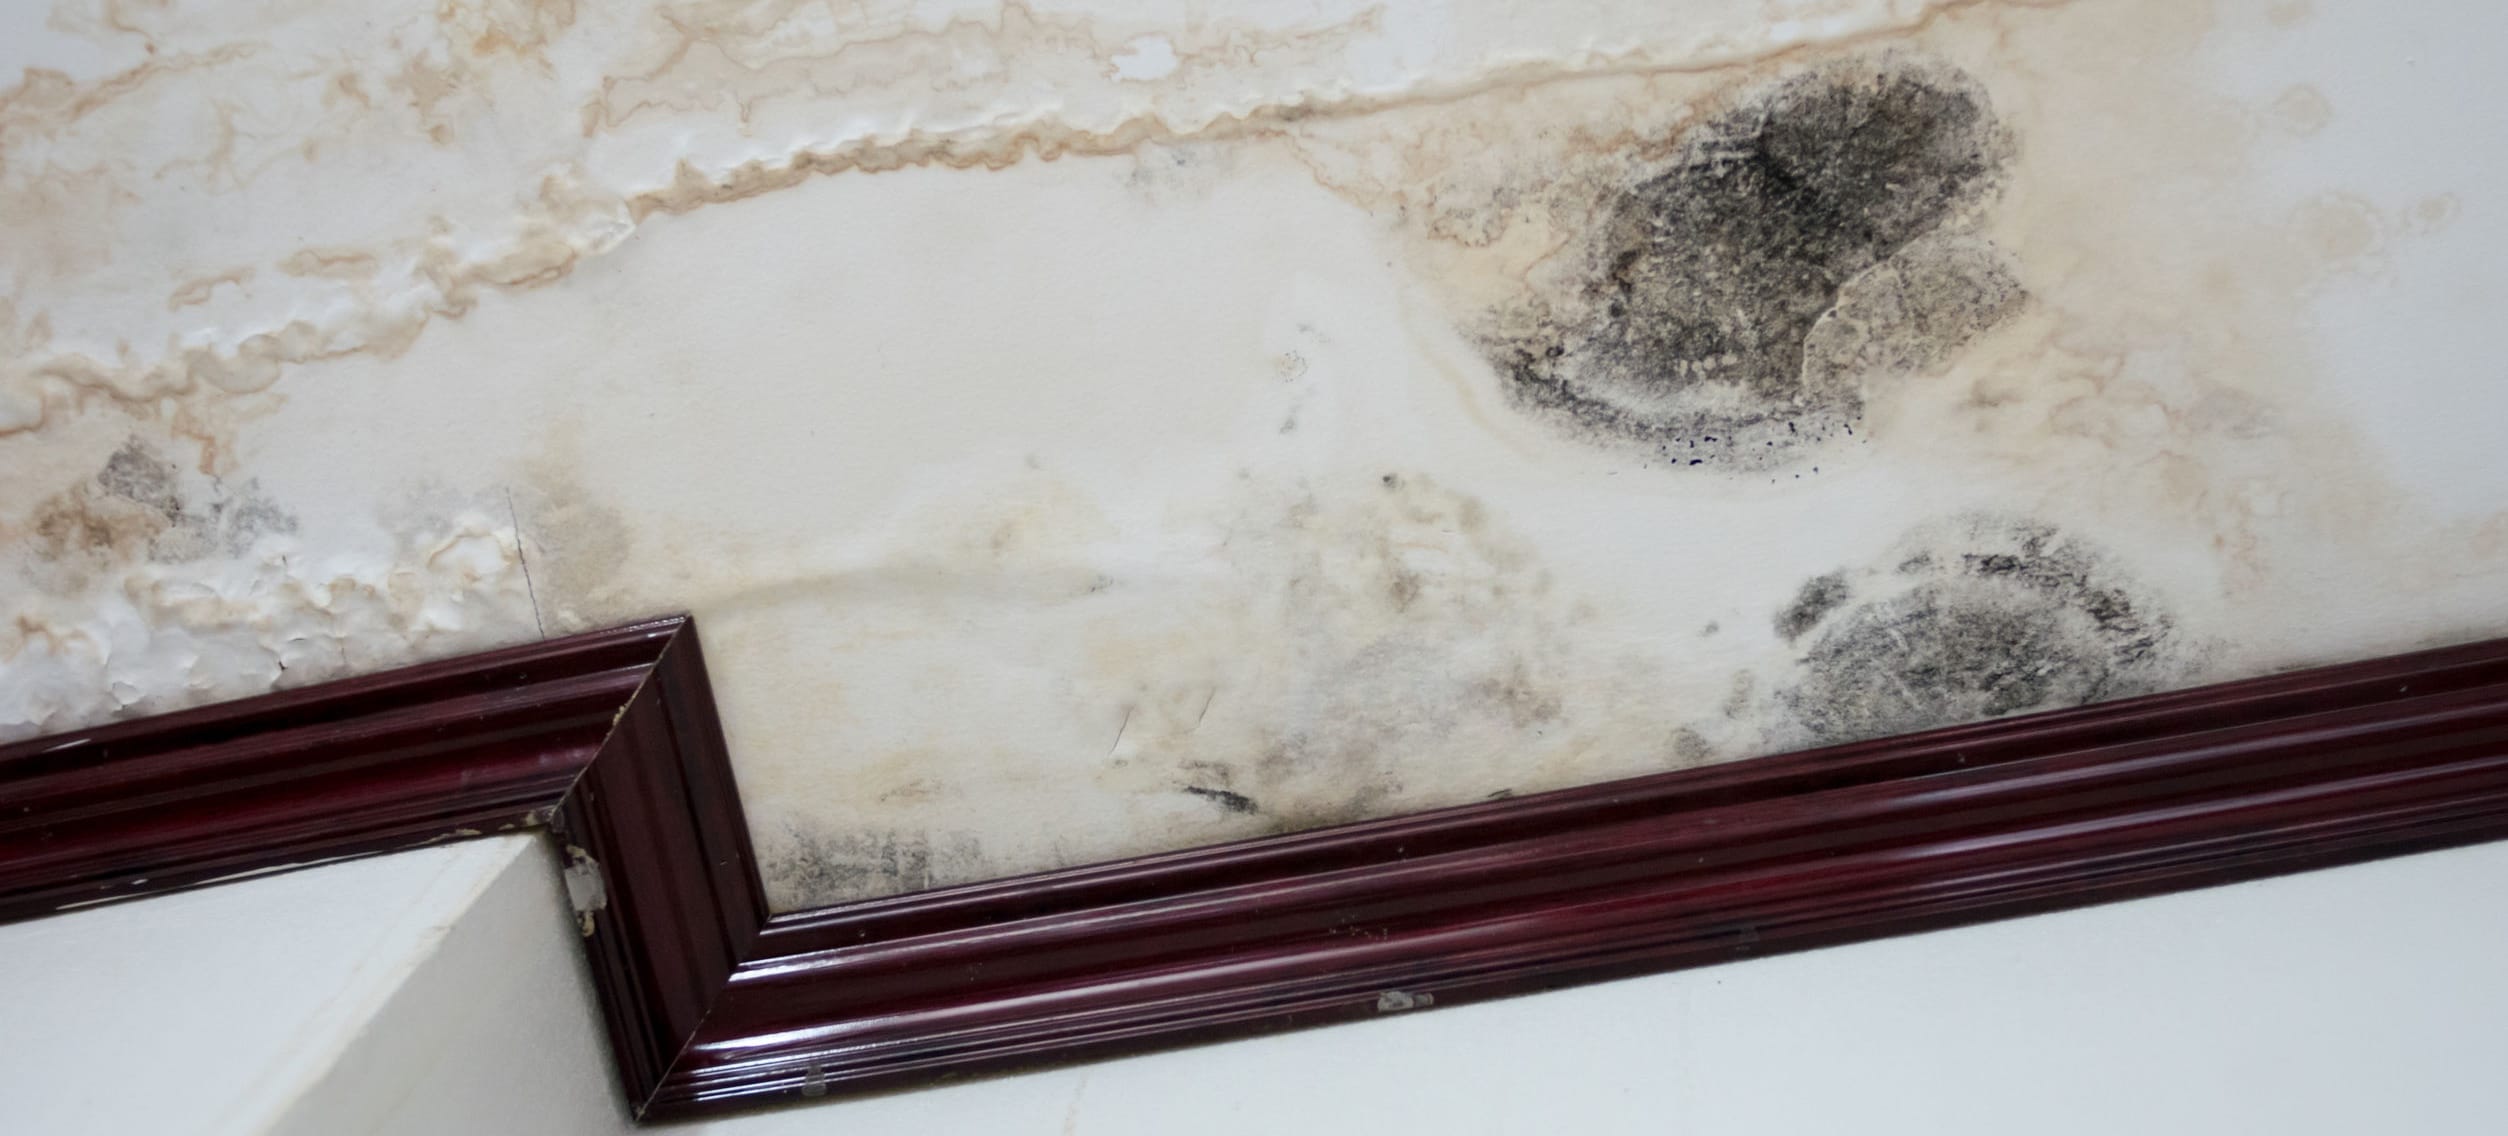 Damage caused by water leakage on a wall and ceiling